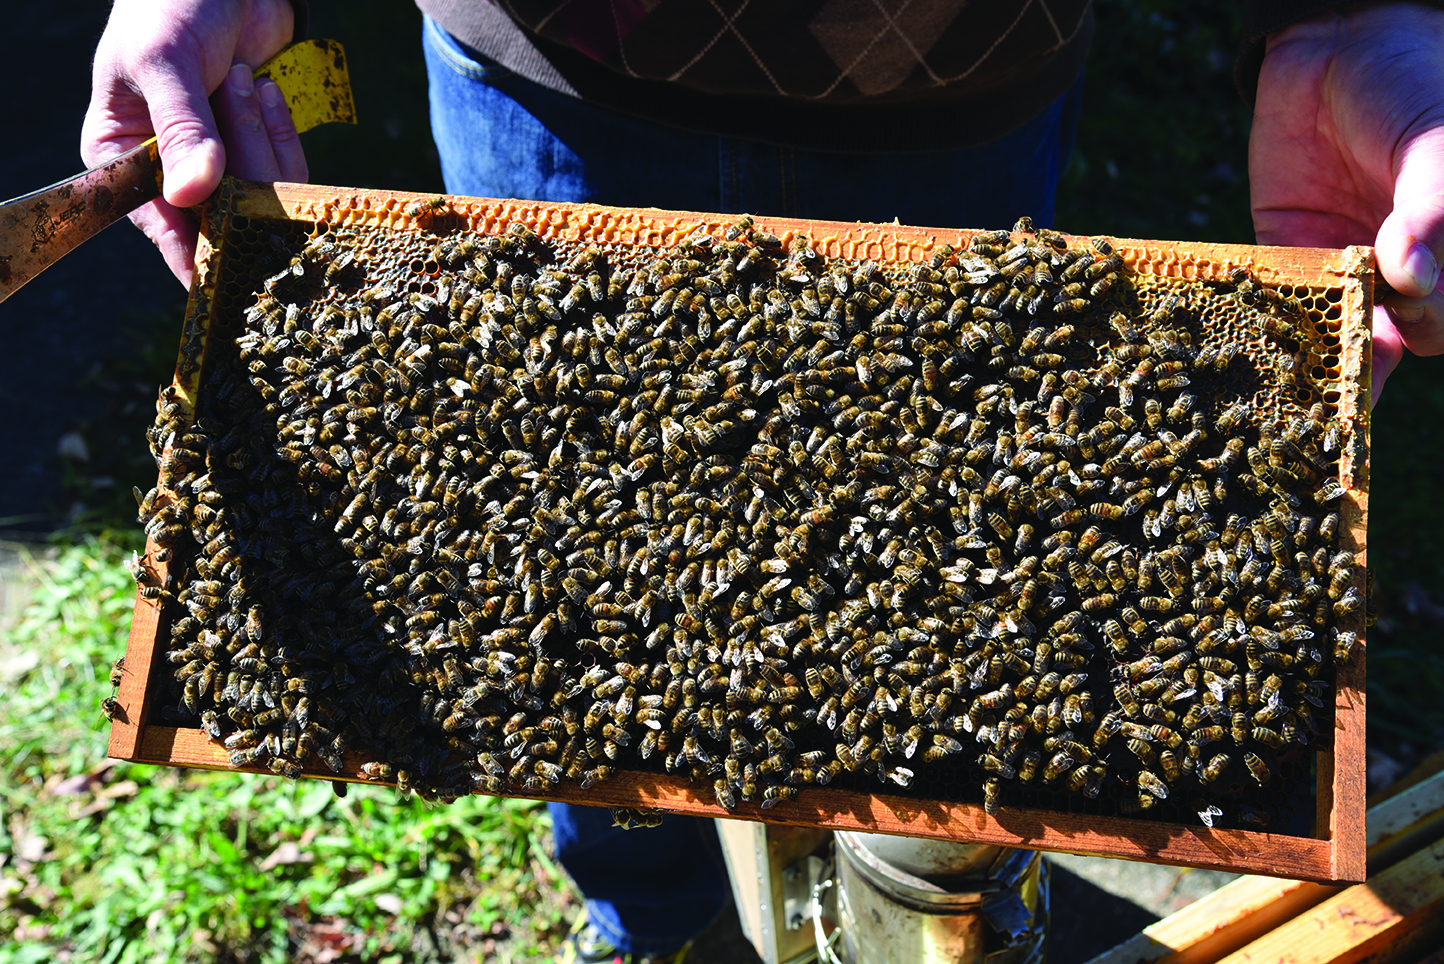 Figure 9. A beekeeper's goal is to manage bees so they remain healthy and productive. An applicator's goal is to safely manage crop pests. These goals can exist at the same time as long as everyone does their part.